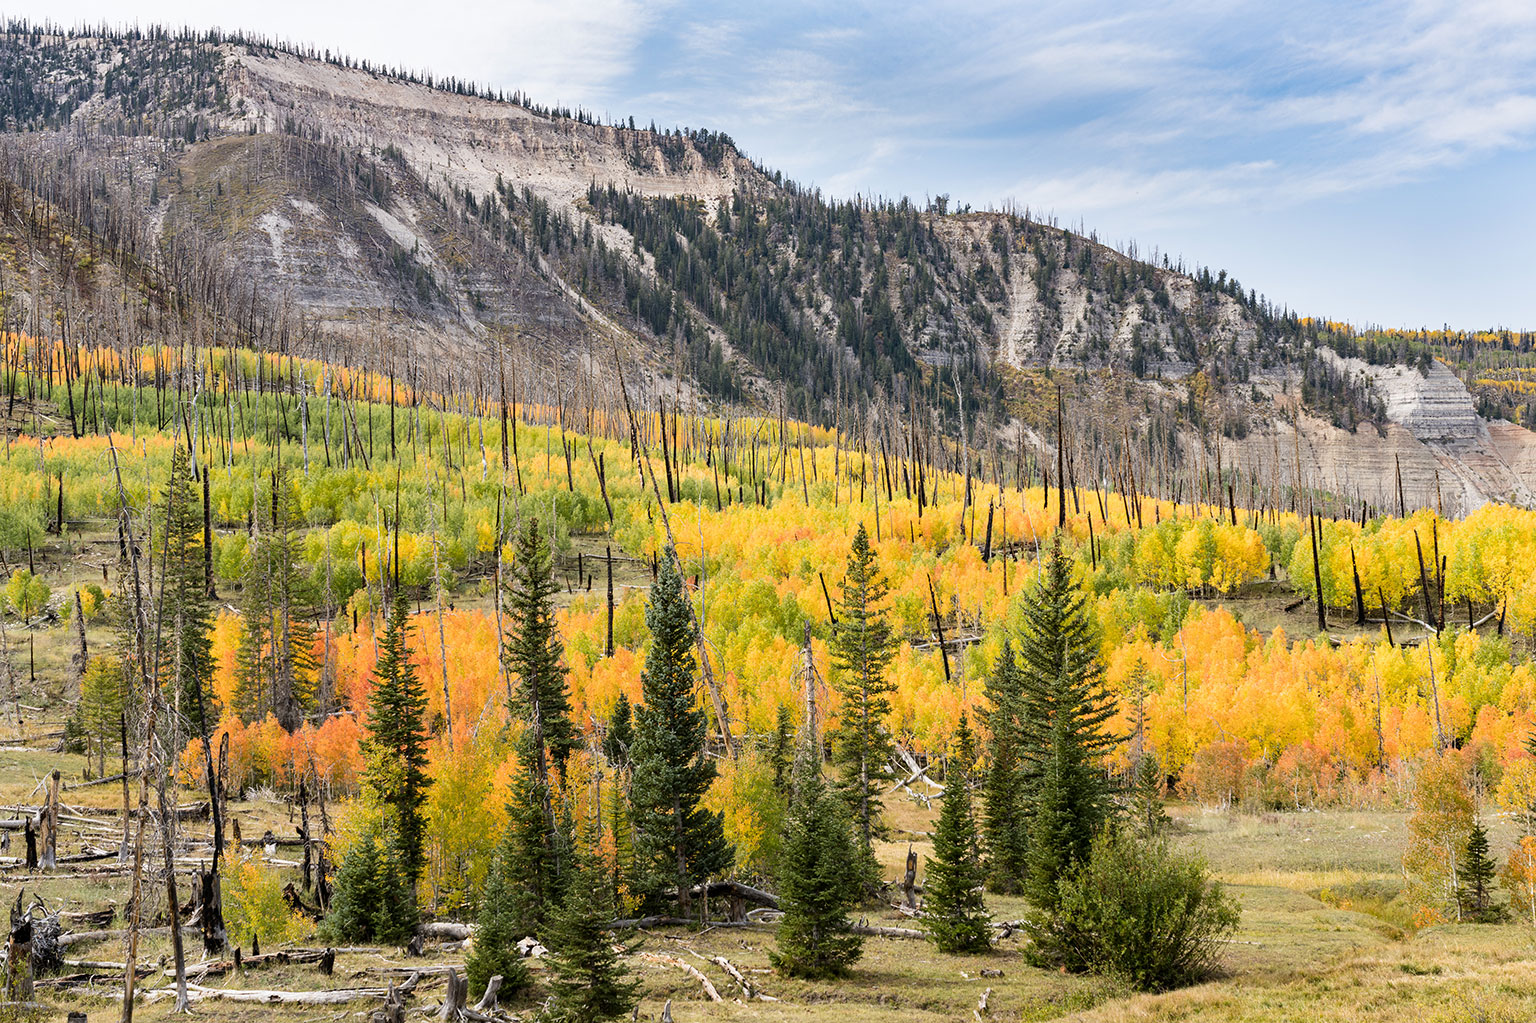 Fall-colored trees growing within a burn scar from a forest fire